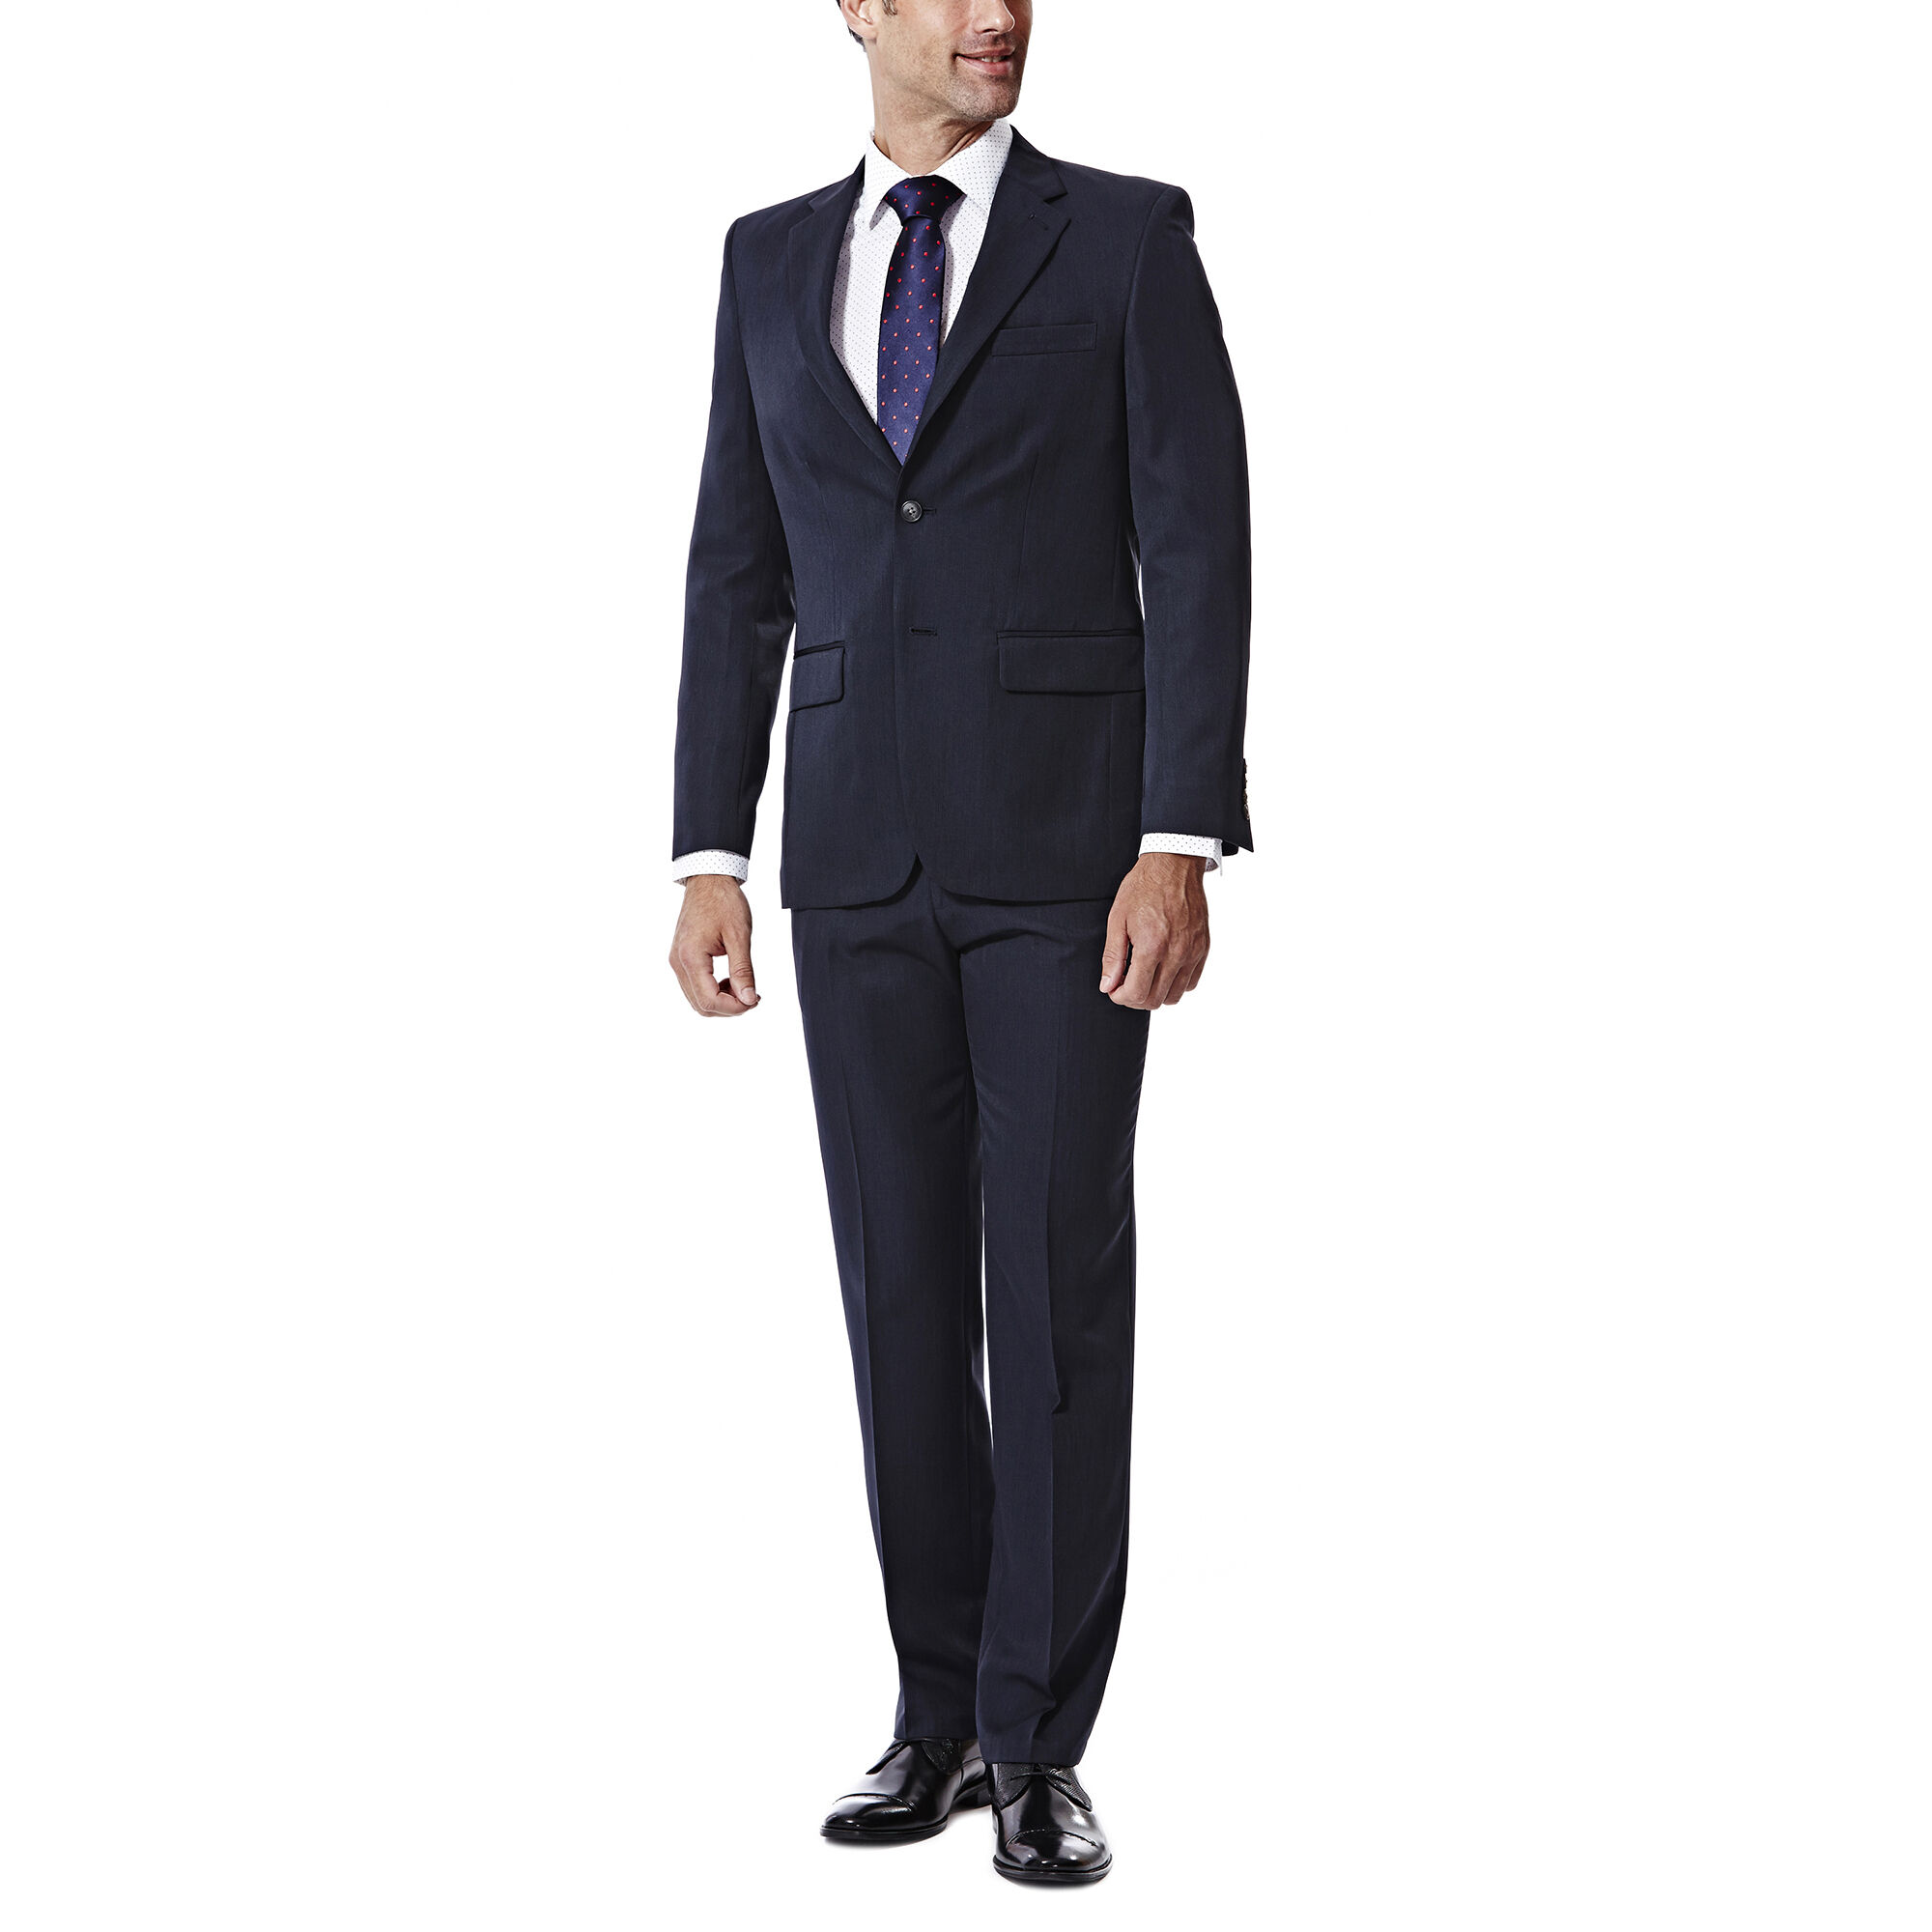 Haggar Travel Performance Suit Separates Jacket Navy (HZ70275 Clothing Suits) photo